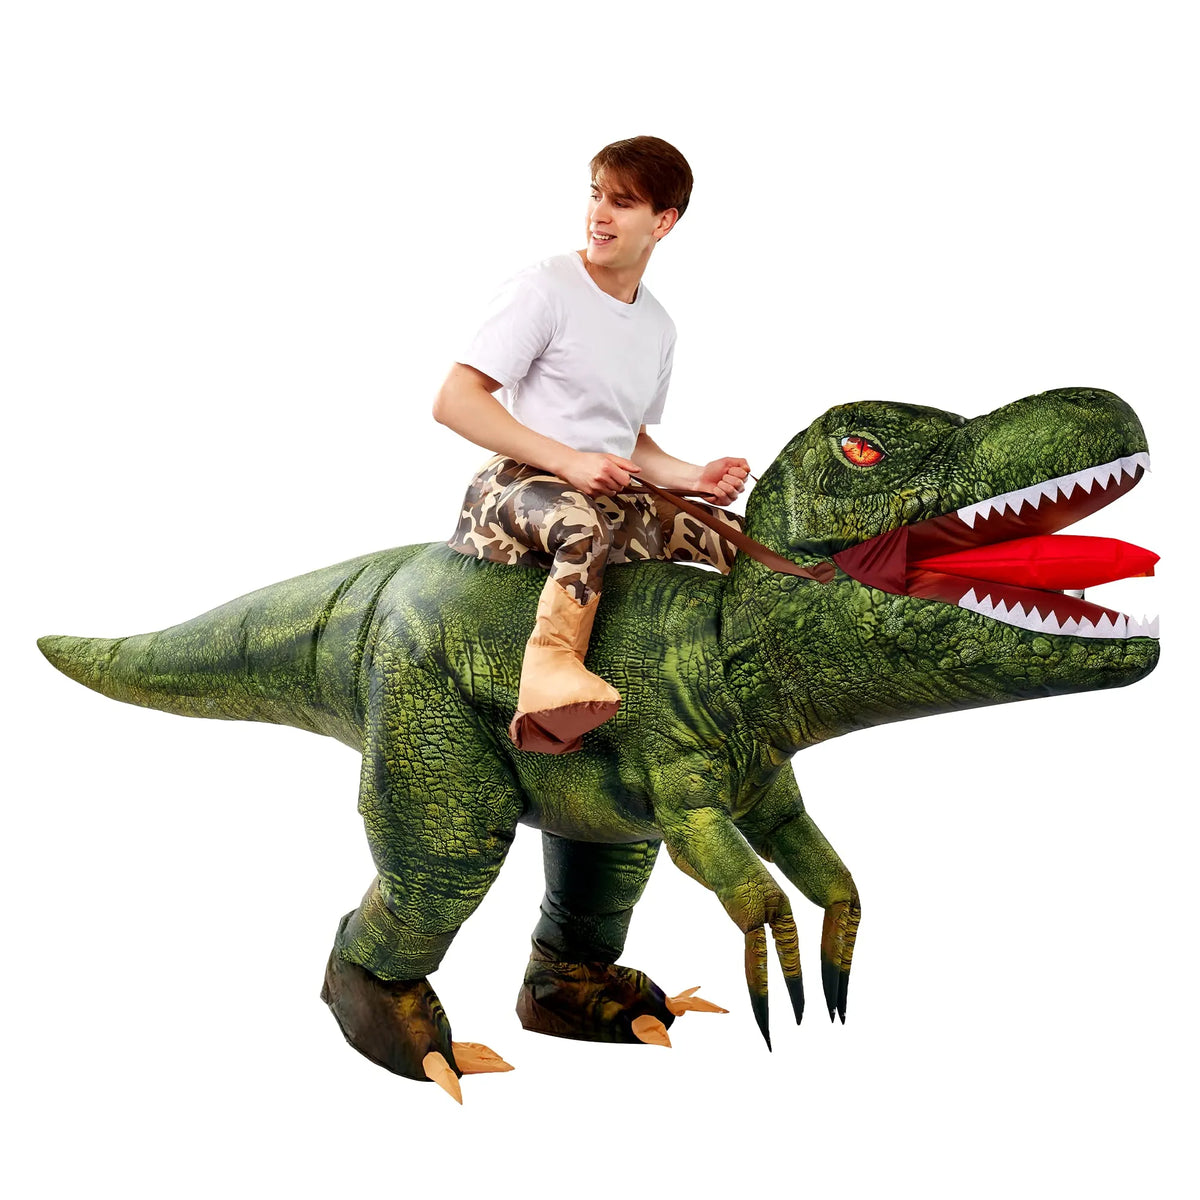 The Benefits of Adult Inflatable Dinosaur Costumes